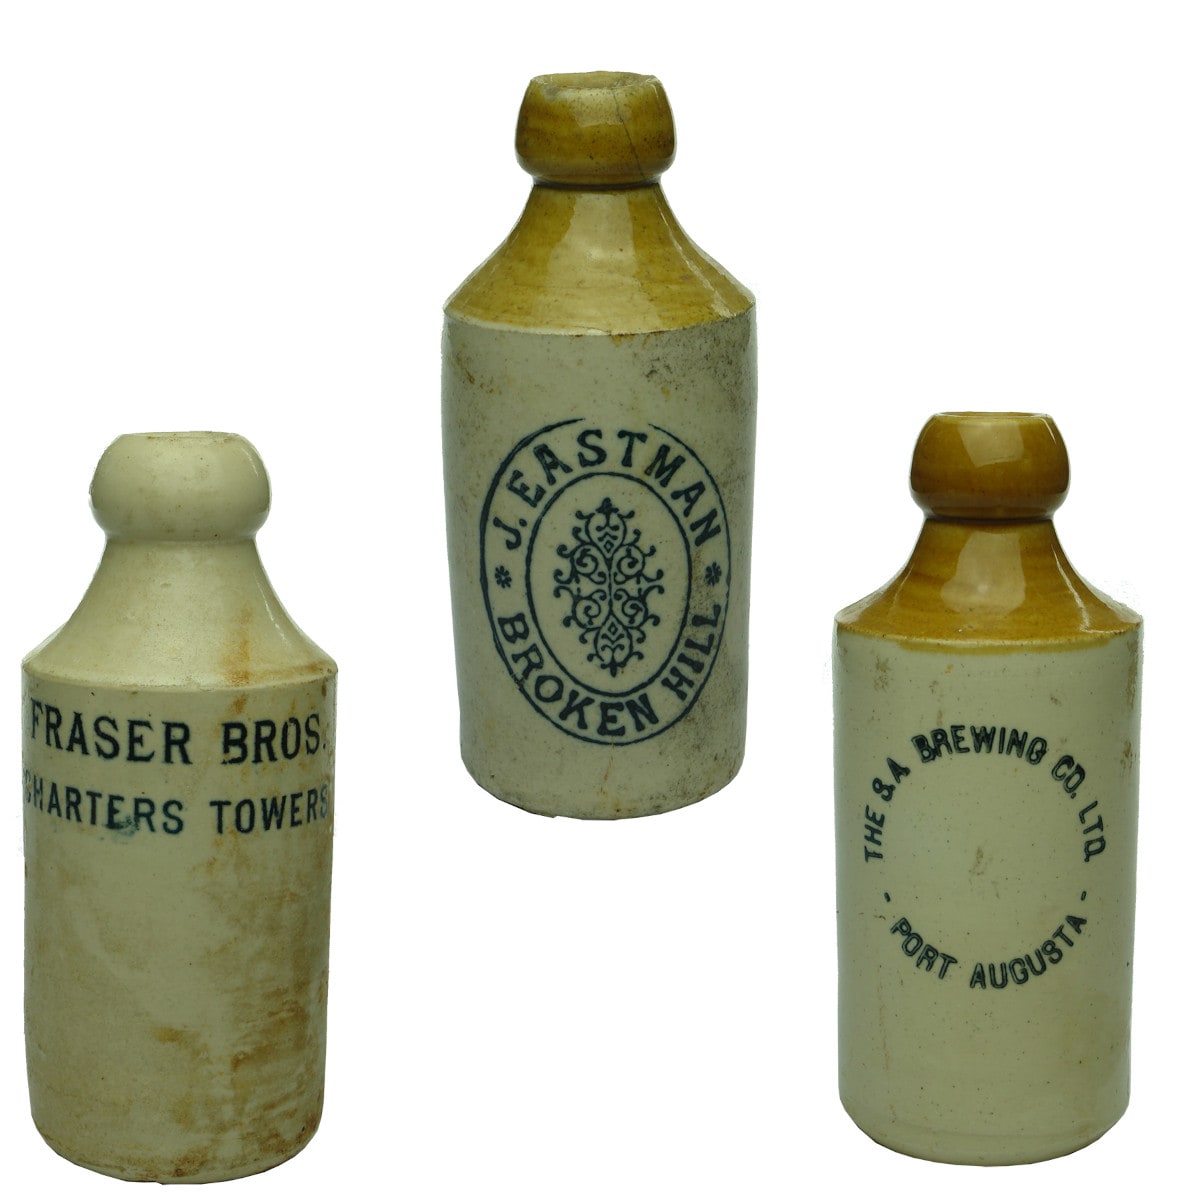 Three Ginger Beers: Fraser Bros. Charters Towers; J. Eastman, Broken Hill; S. A. Brewing, Port Augusta.